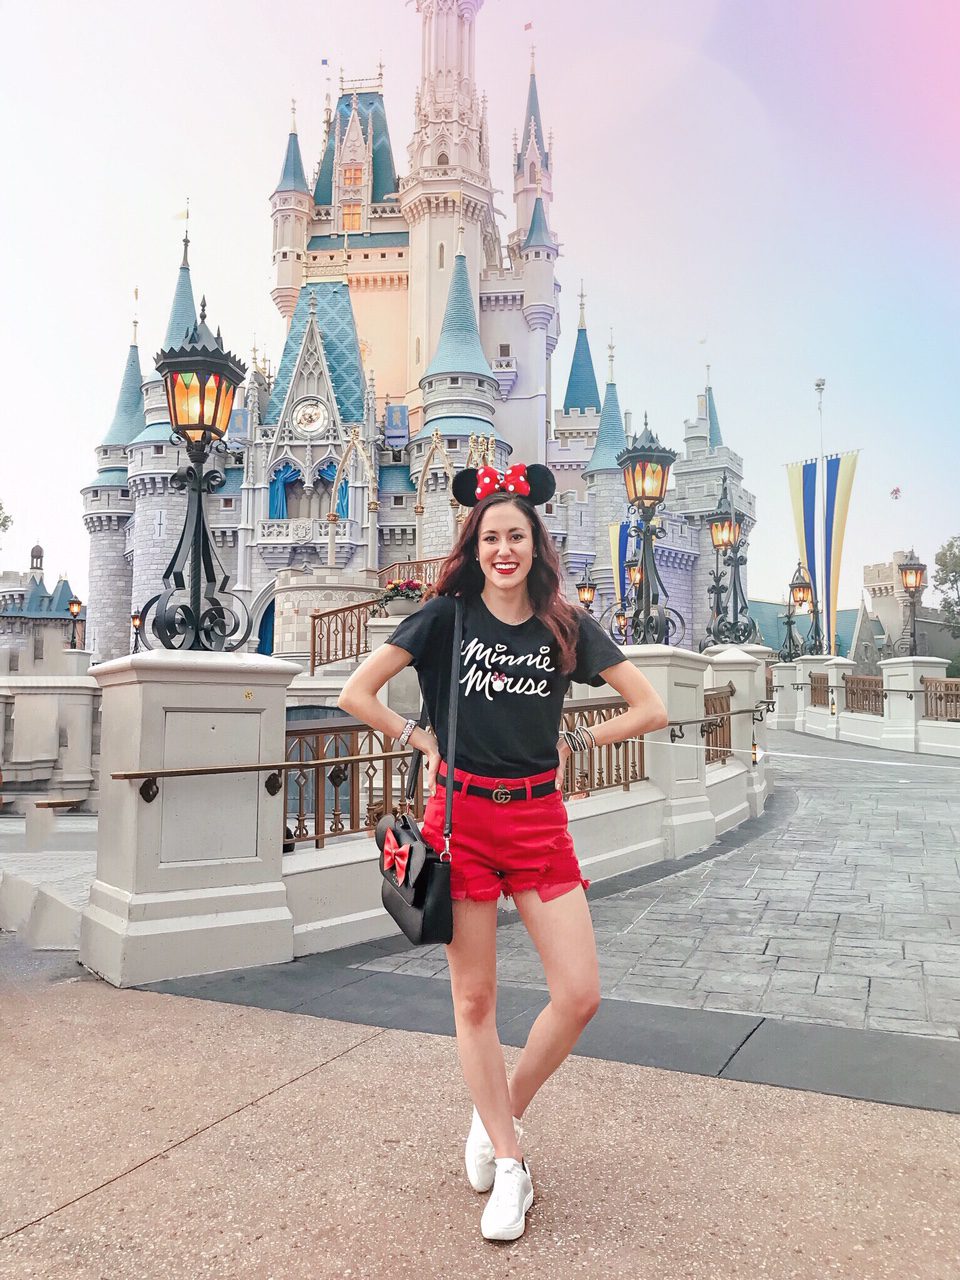 One Day at Disney World – Our whirlwind 24-hour Disney trip!